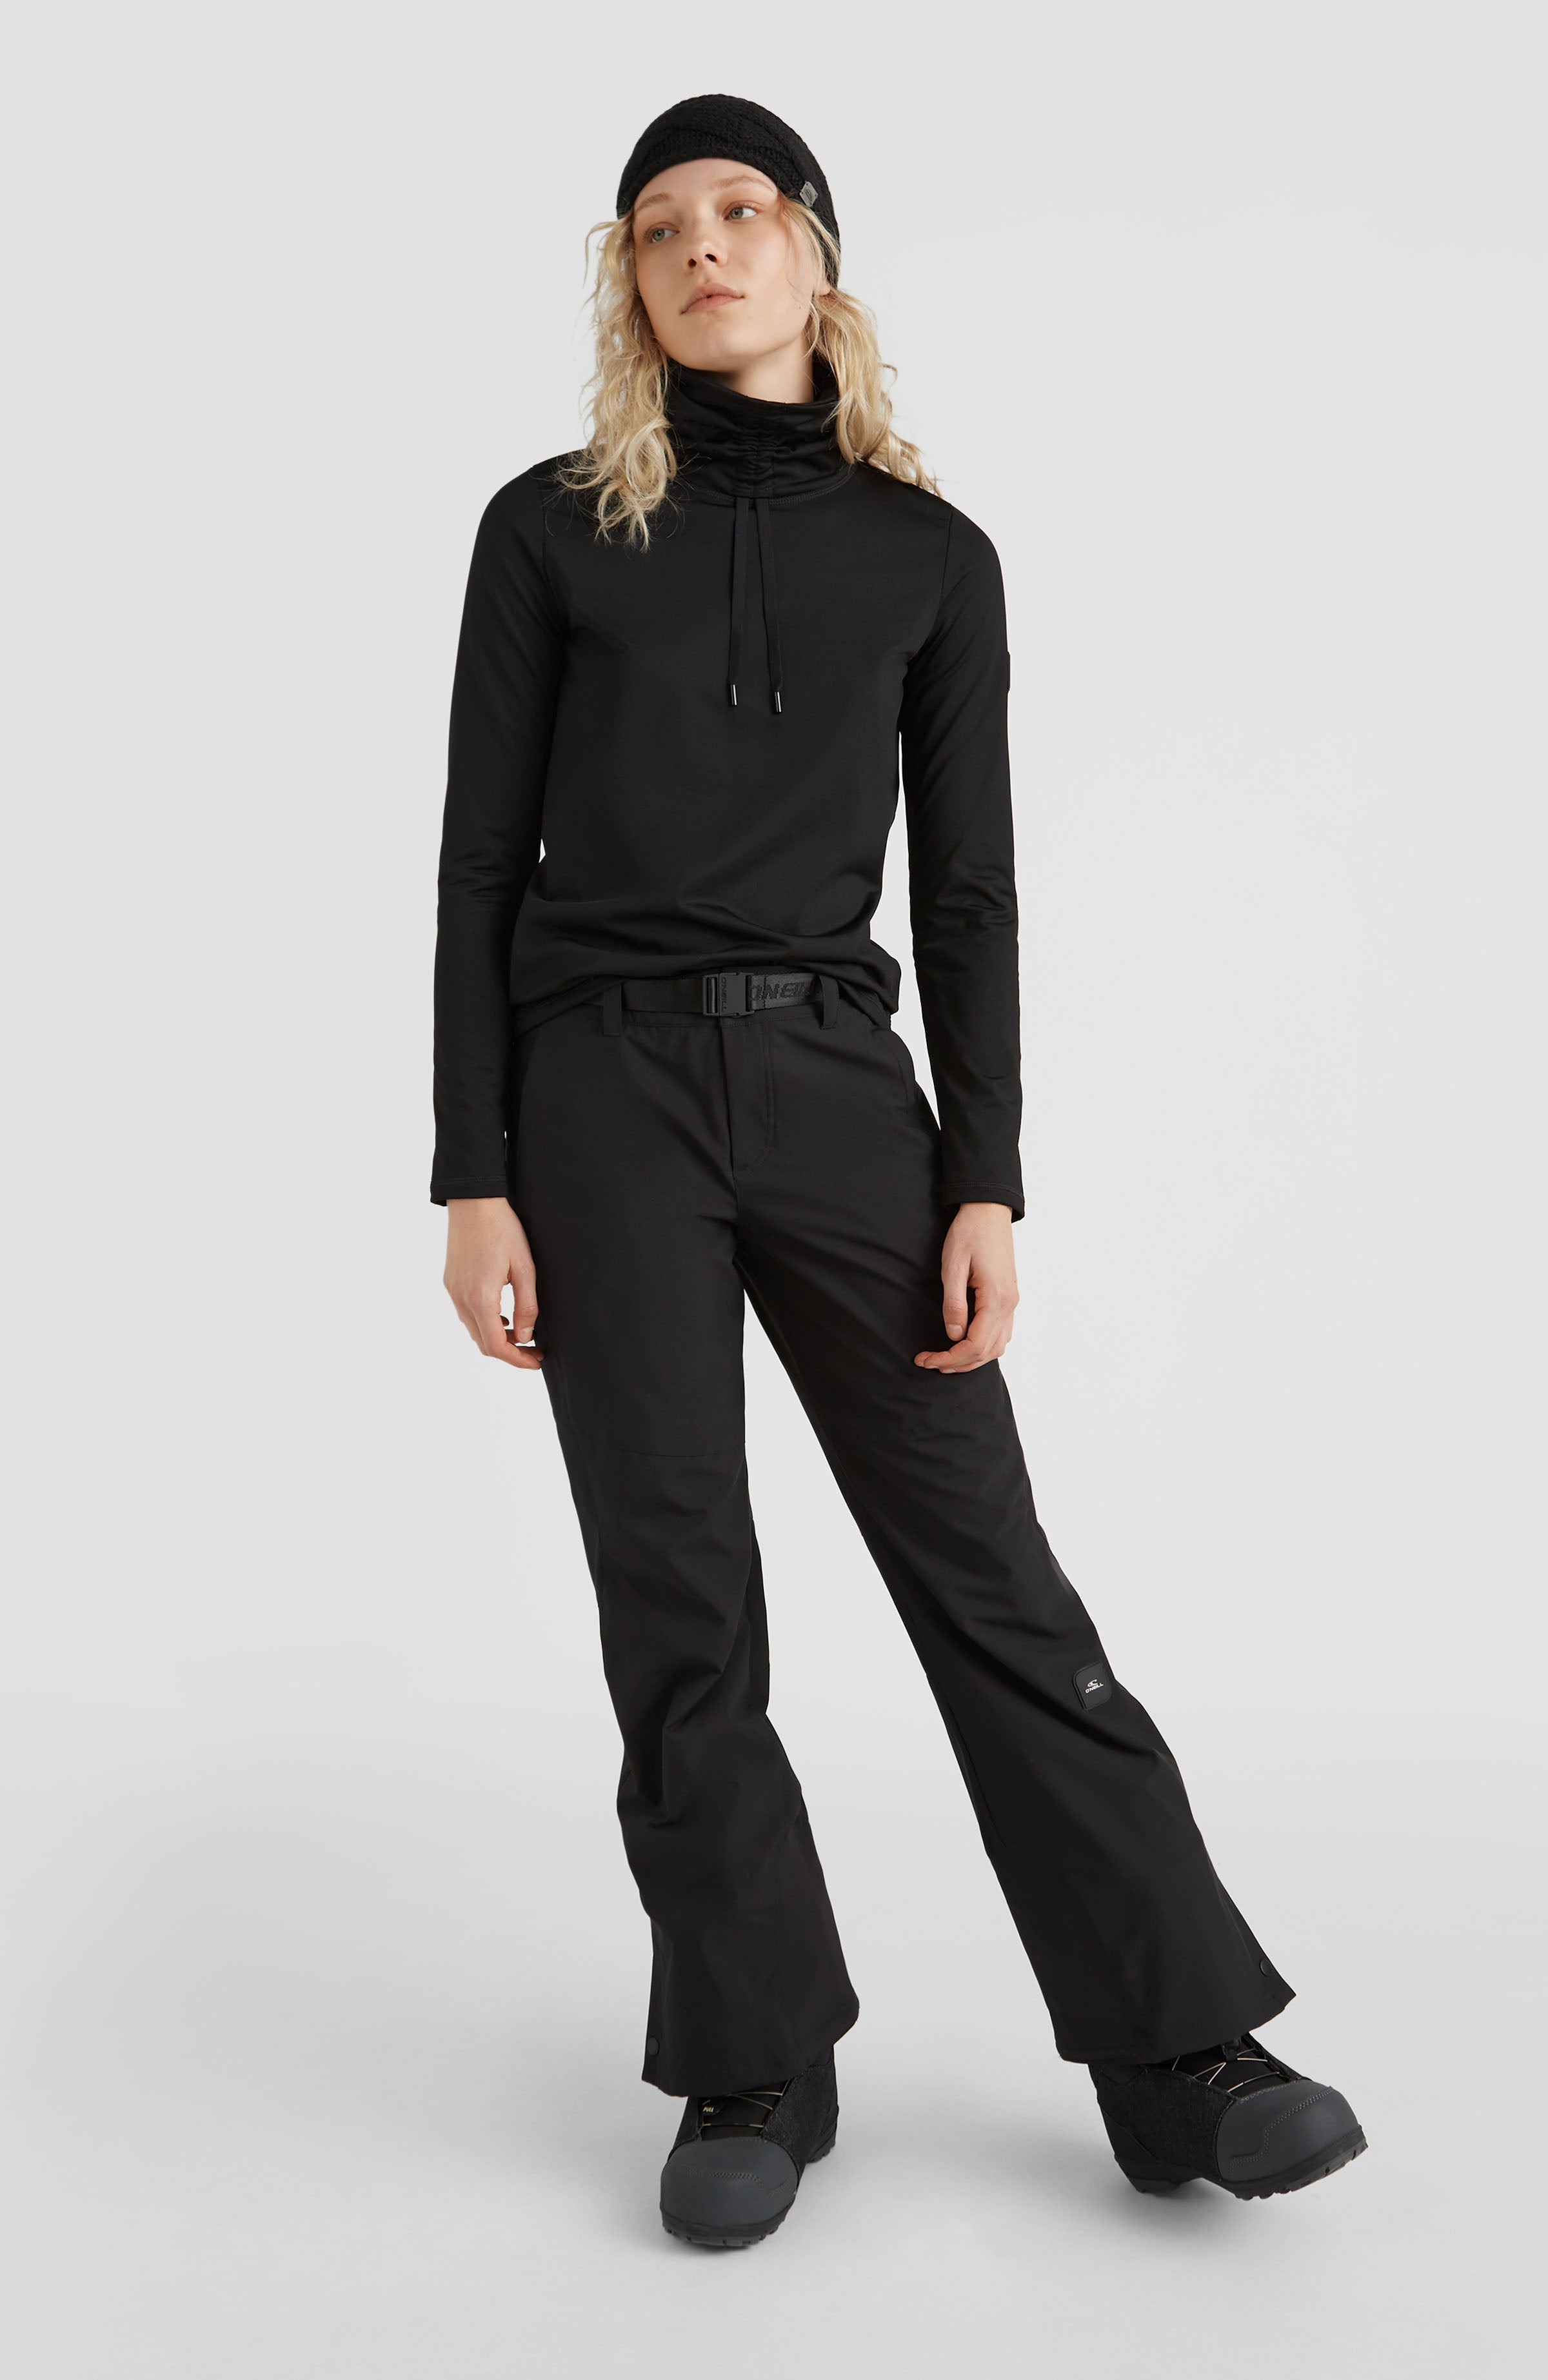 Star Snow Pants  Black Out – O'Neill